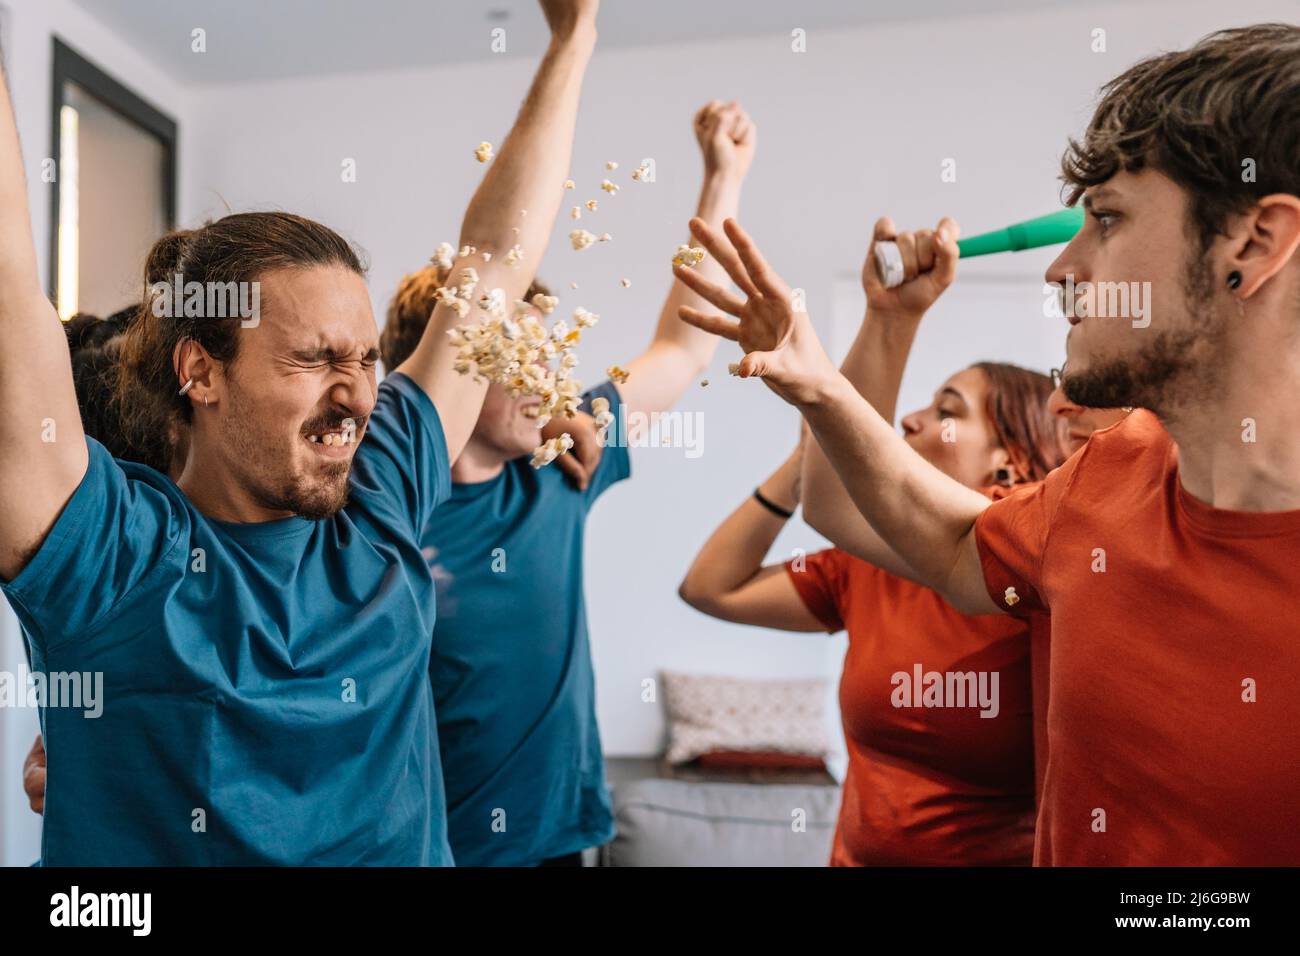 friends celebrating a sports championship on TV. losing team throws popcorn at the winning team. e-sports. soccer. Stock Photo